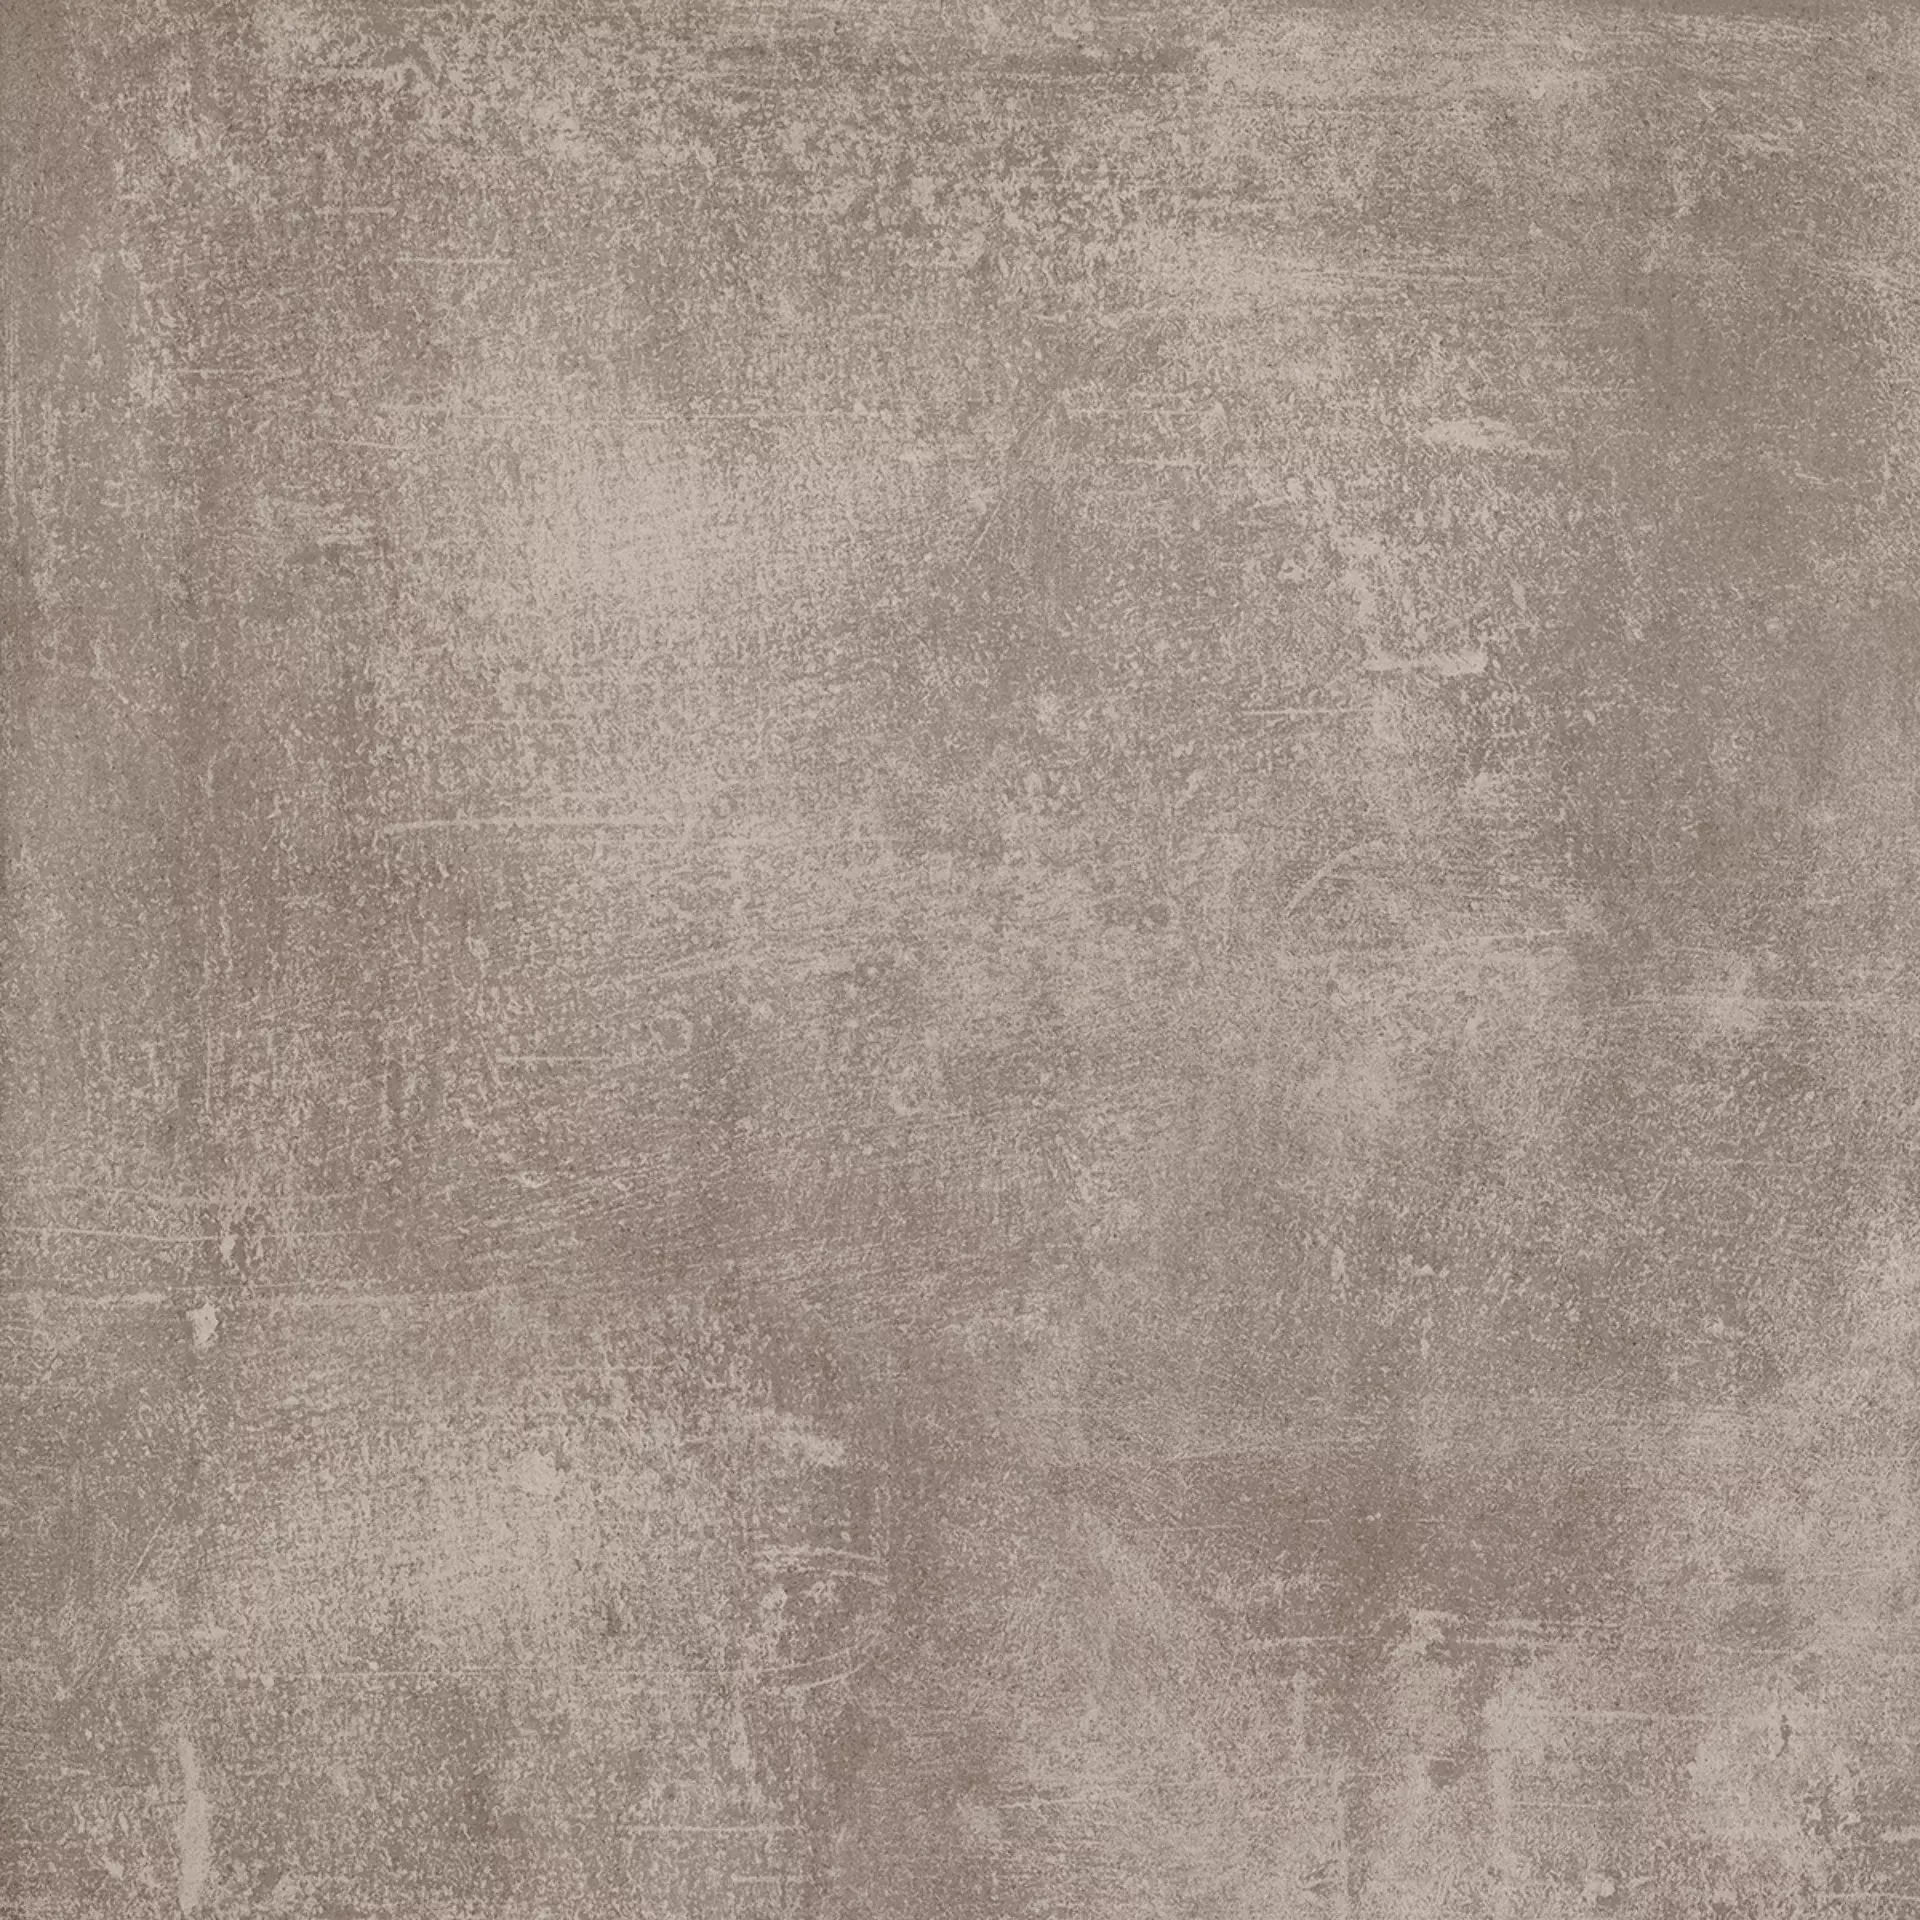 Rondine Volcano Taupe Grip J89009 100x100cm rectified 20mm